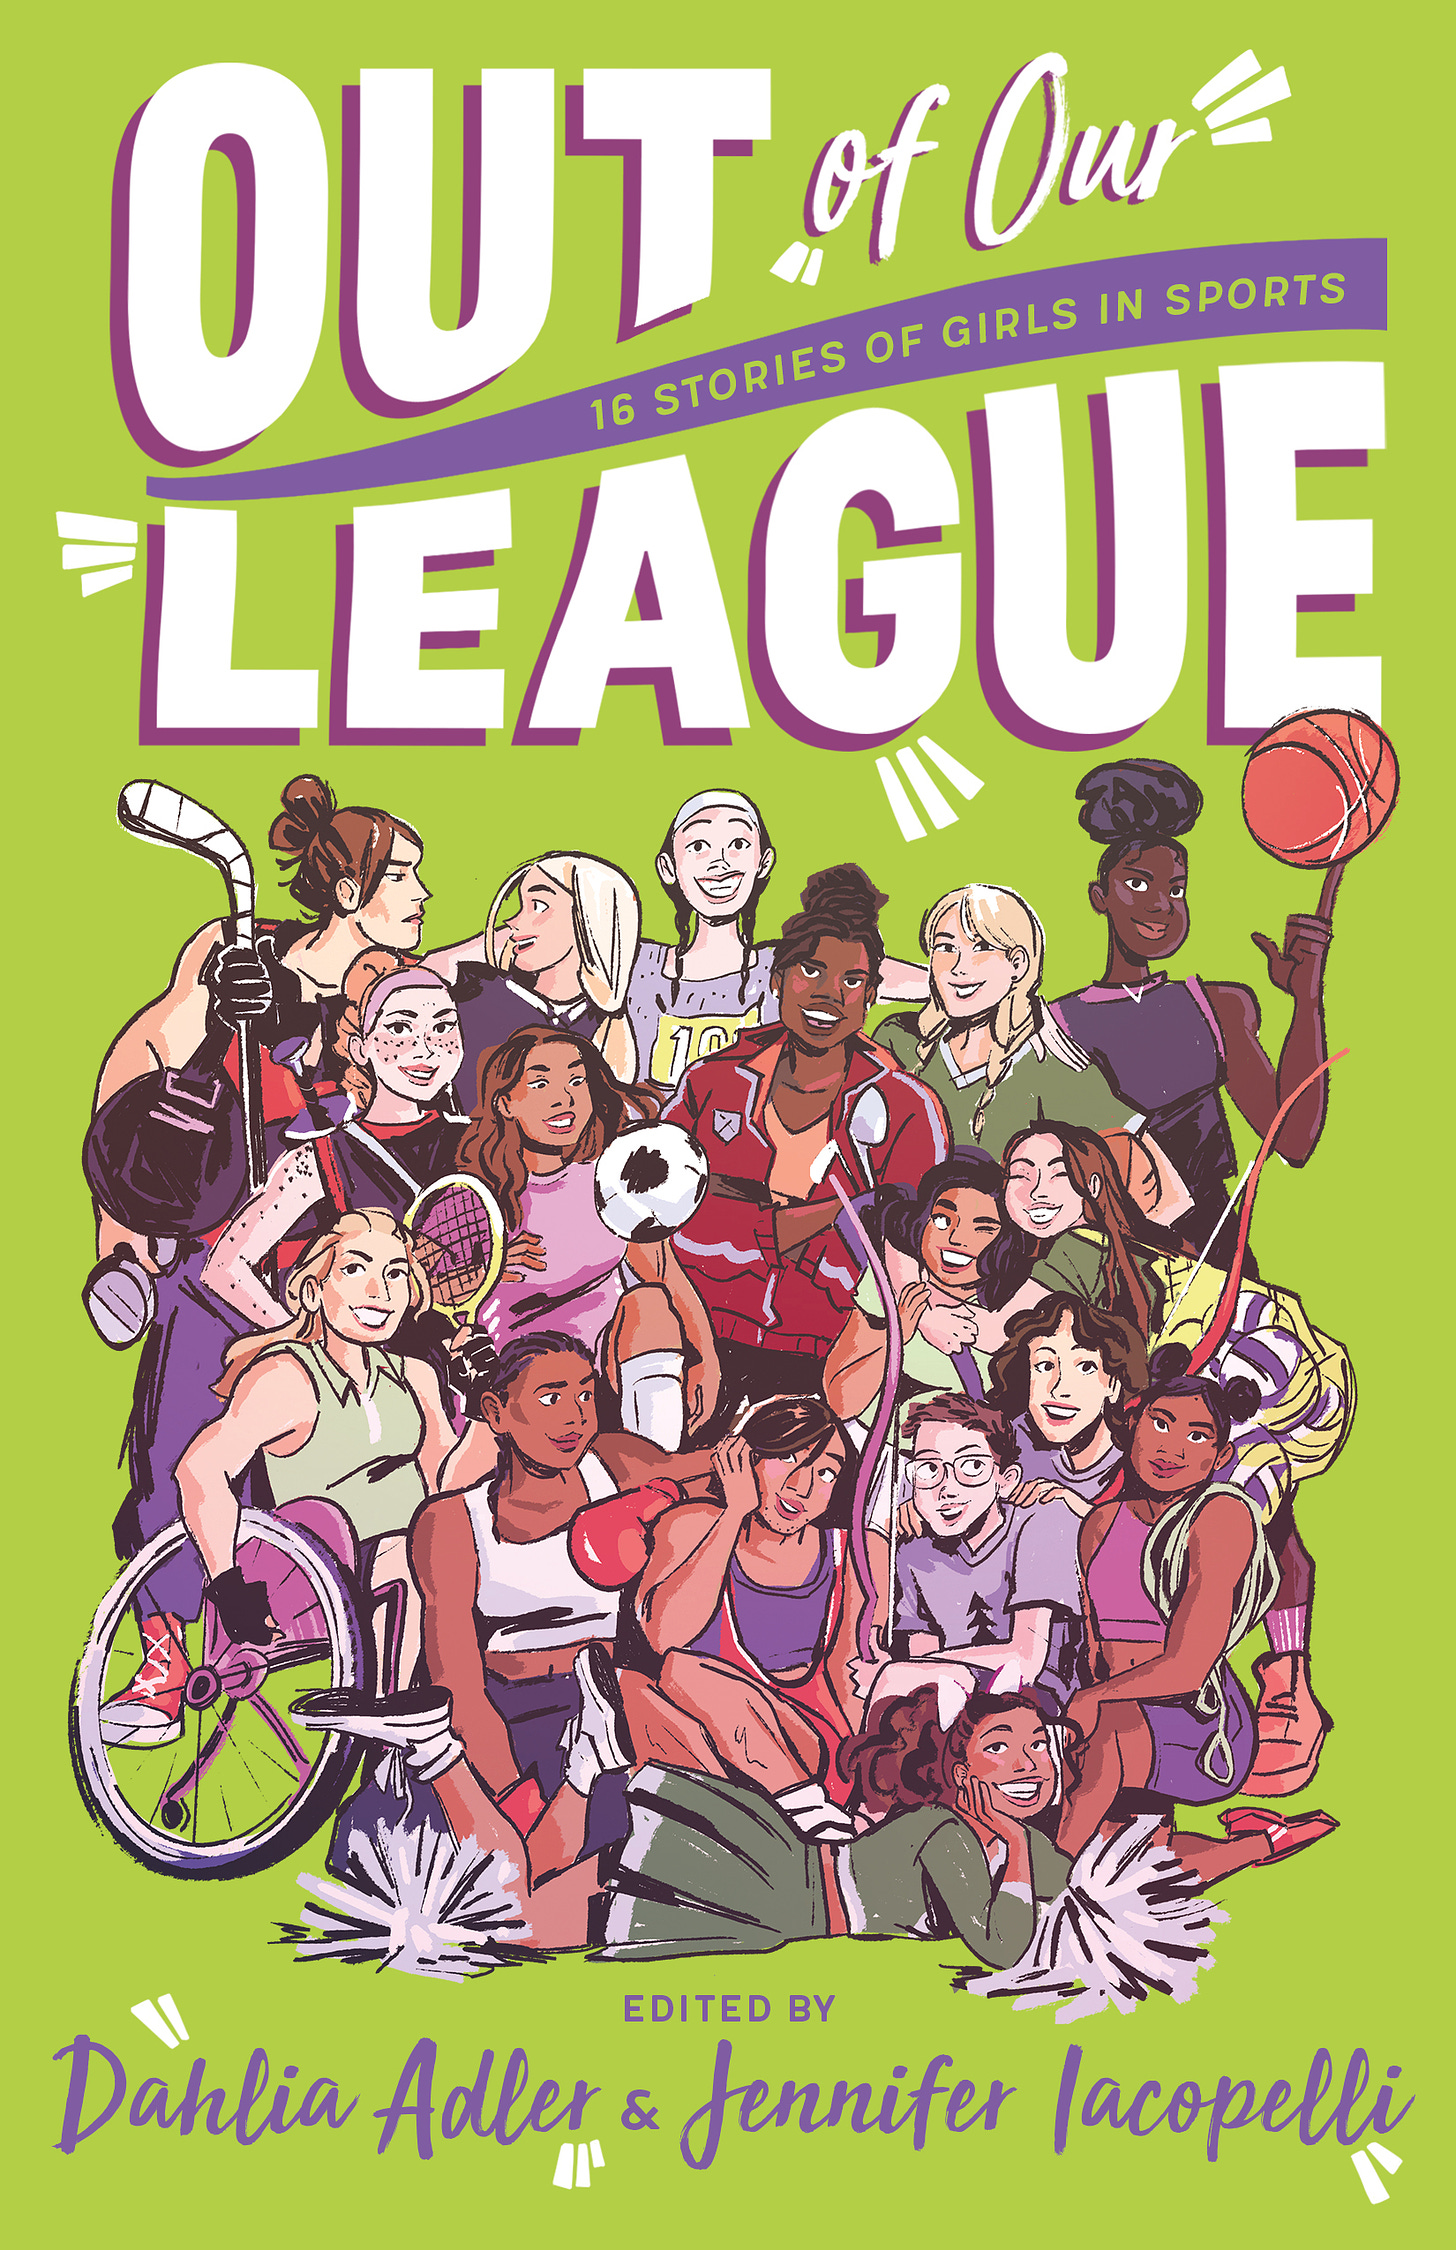 Out of Our League: 16 Stories of Girls in Sports by Dahlia Adler | Goodreads